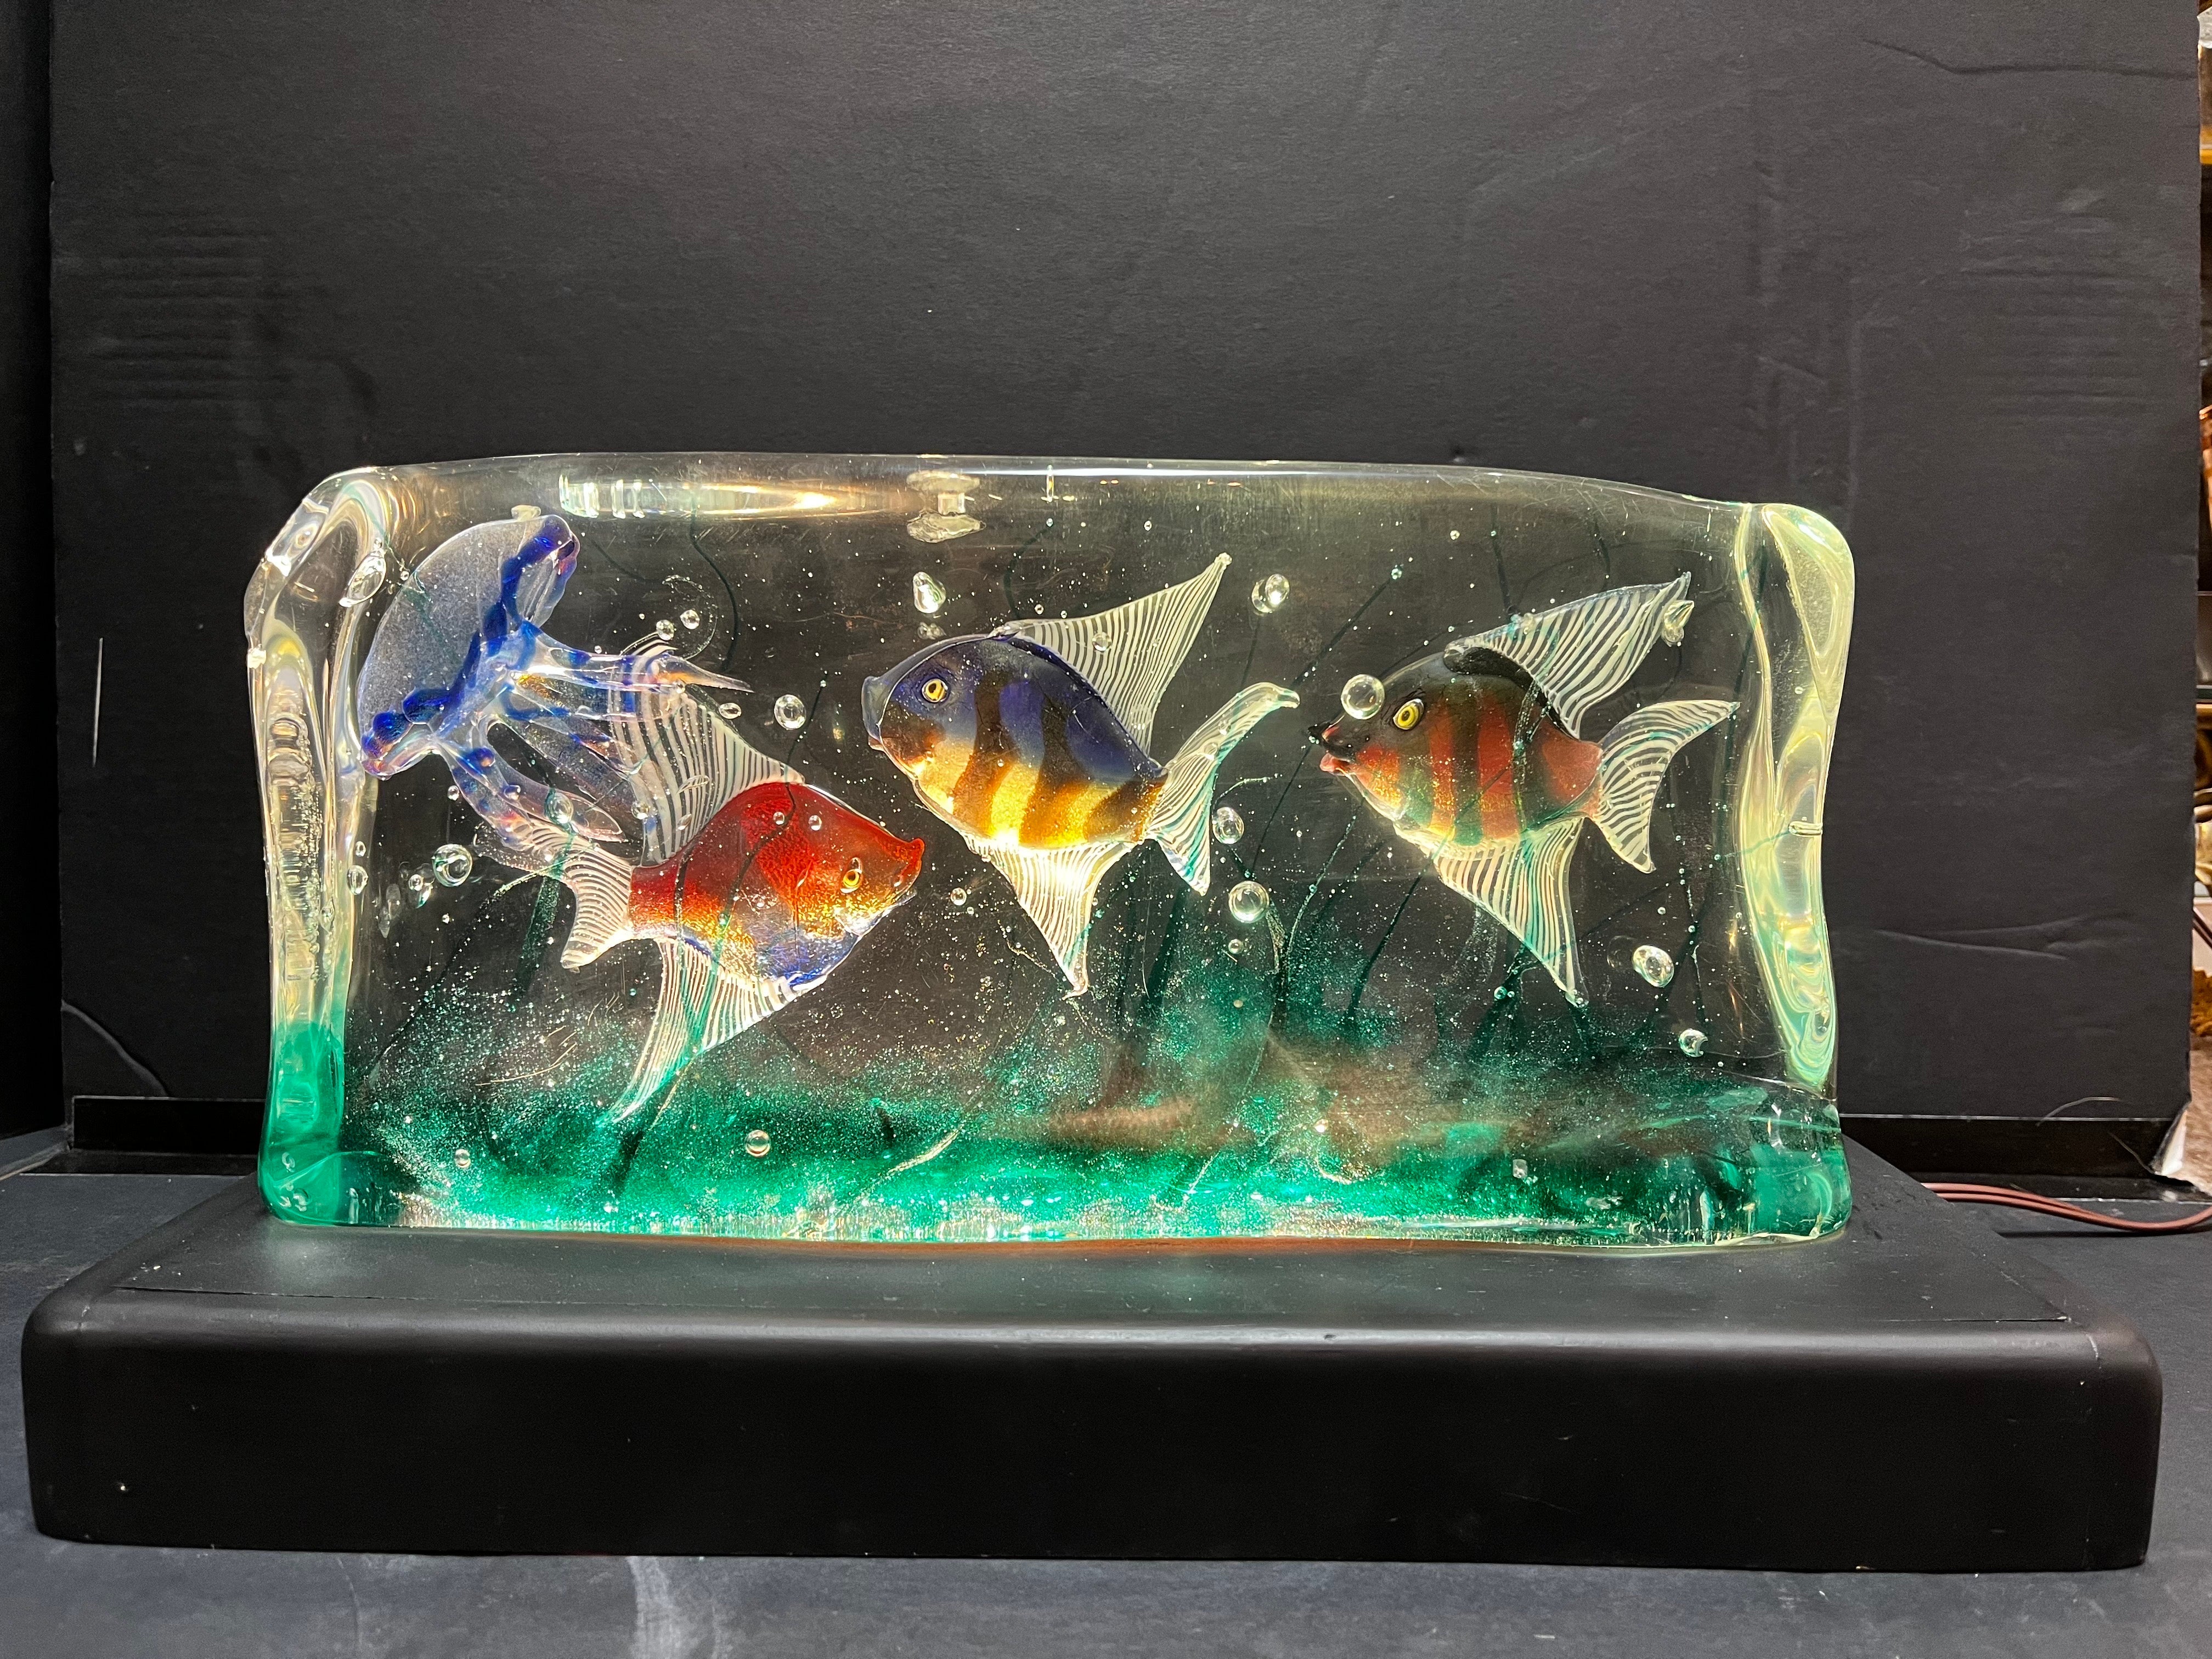 A large Mid-Century Modern era Murano glass fish and jellyfish aquarium sculpture presented as a table light on a vintage custom made wood base. The base has been recently painted and the piece rewired. The Murano glass aquarium is in the style of